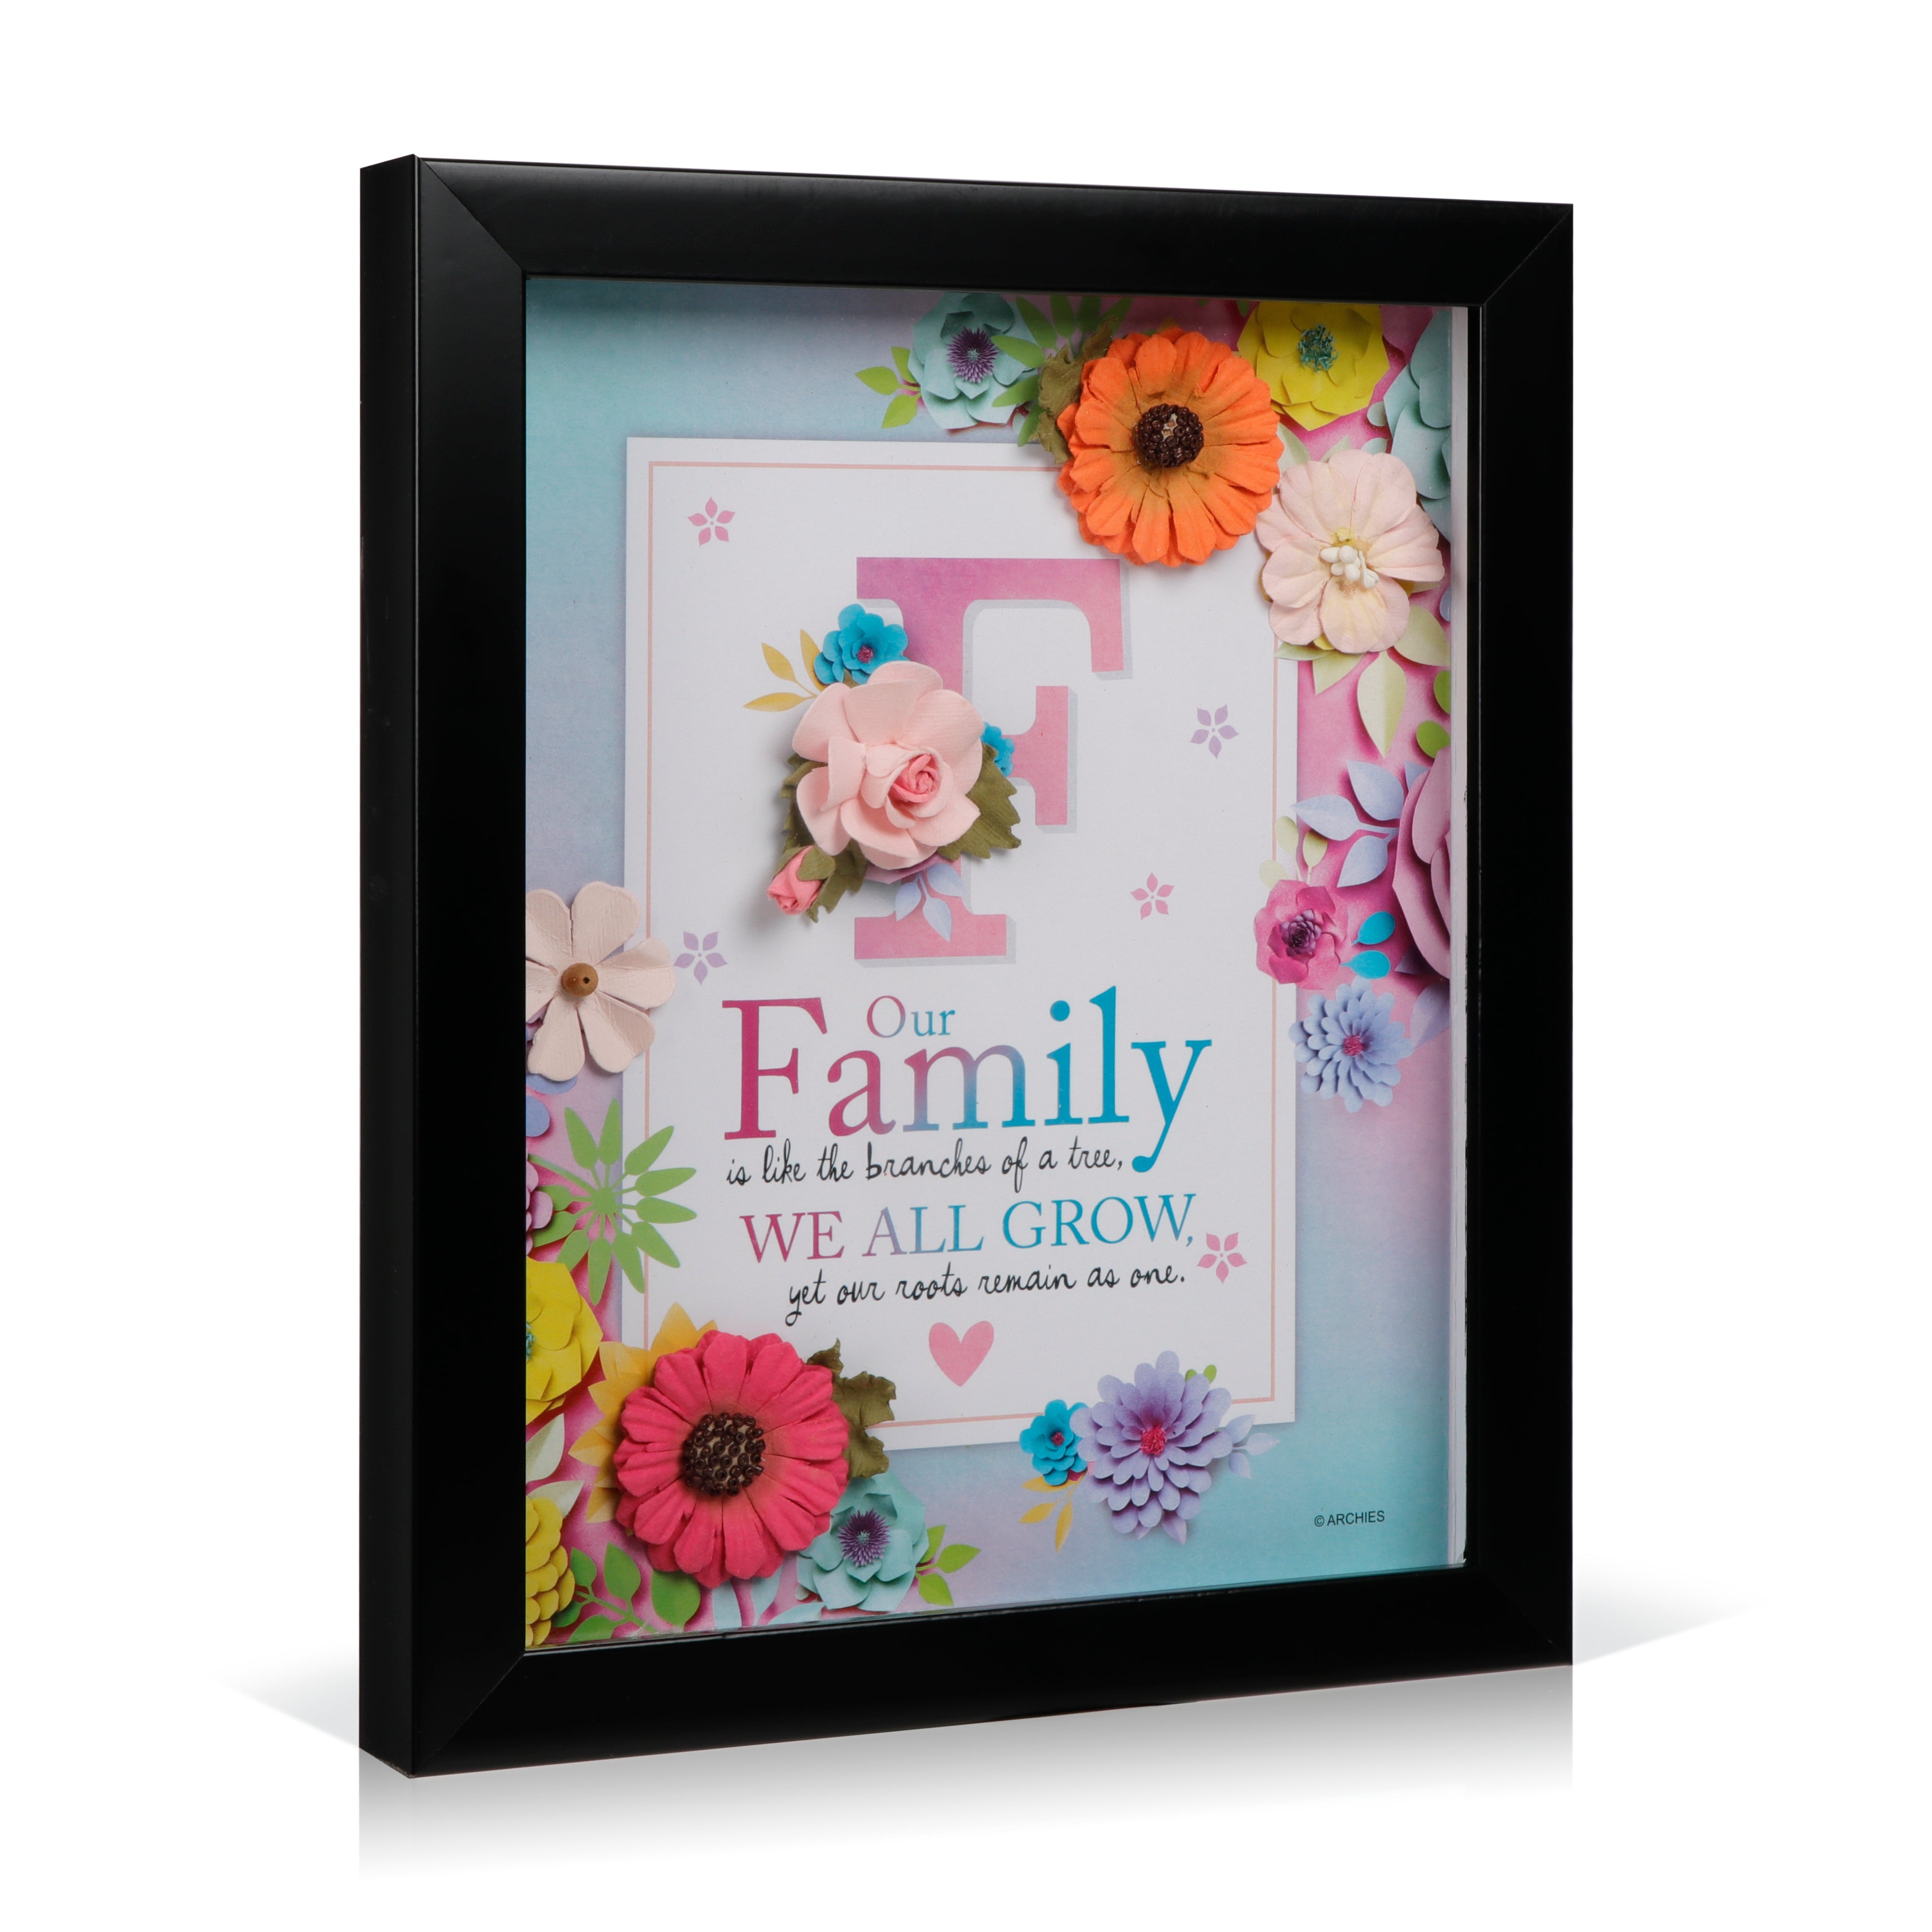 Archies KEEPSAKE QUOTATION - F.OUR FAMILY IS .... For gifting and Home décor